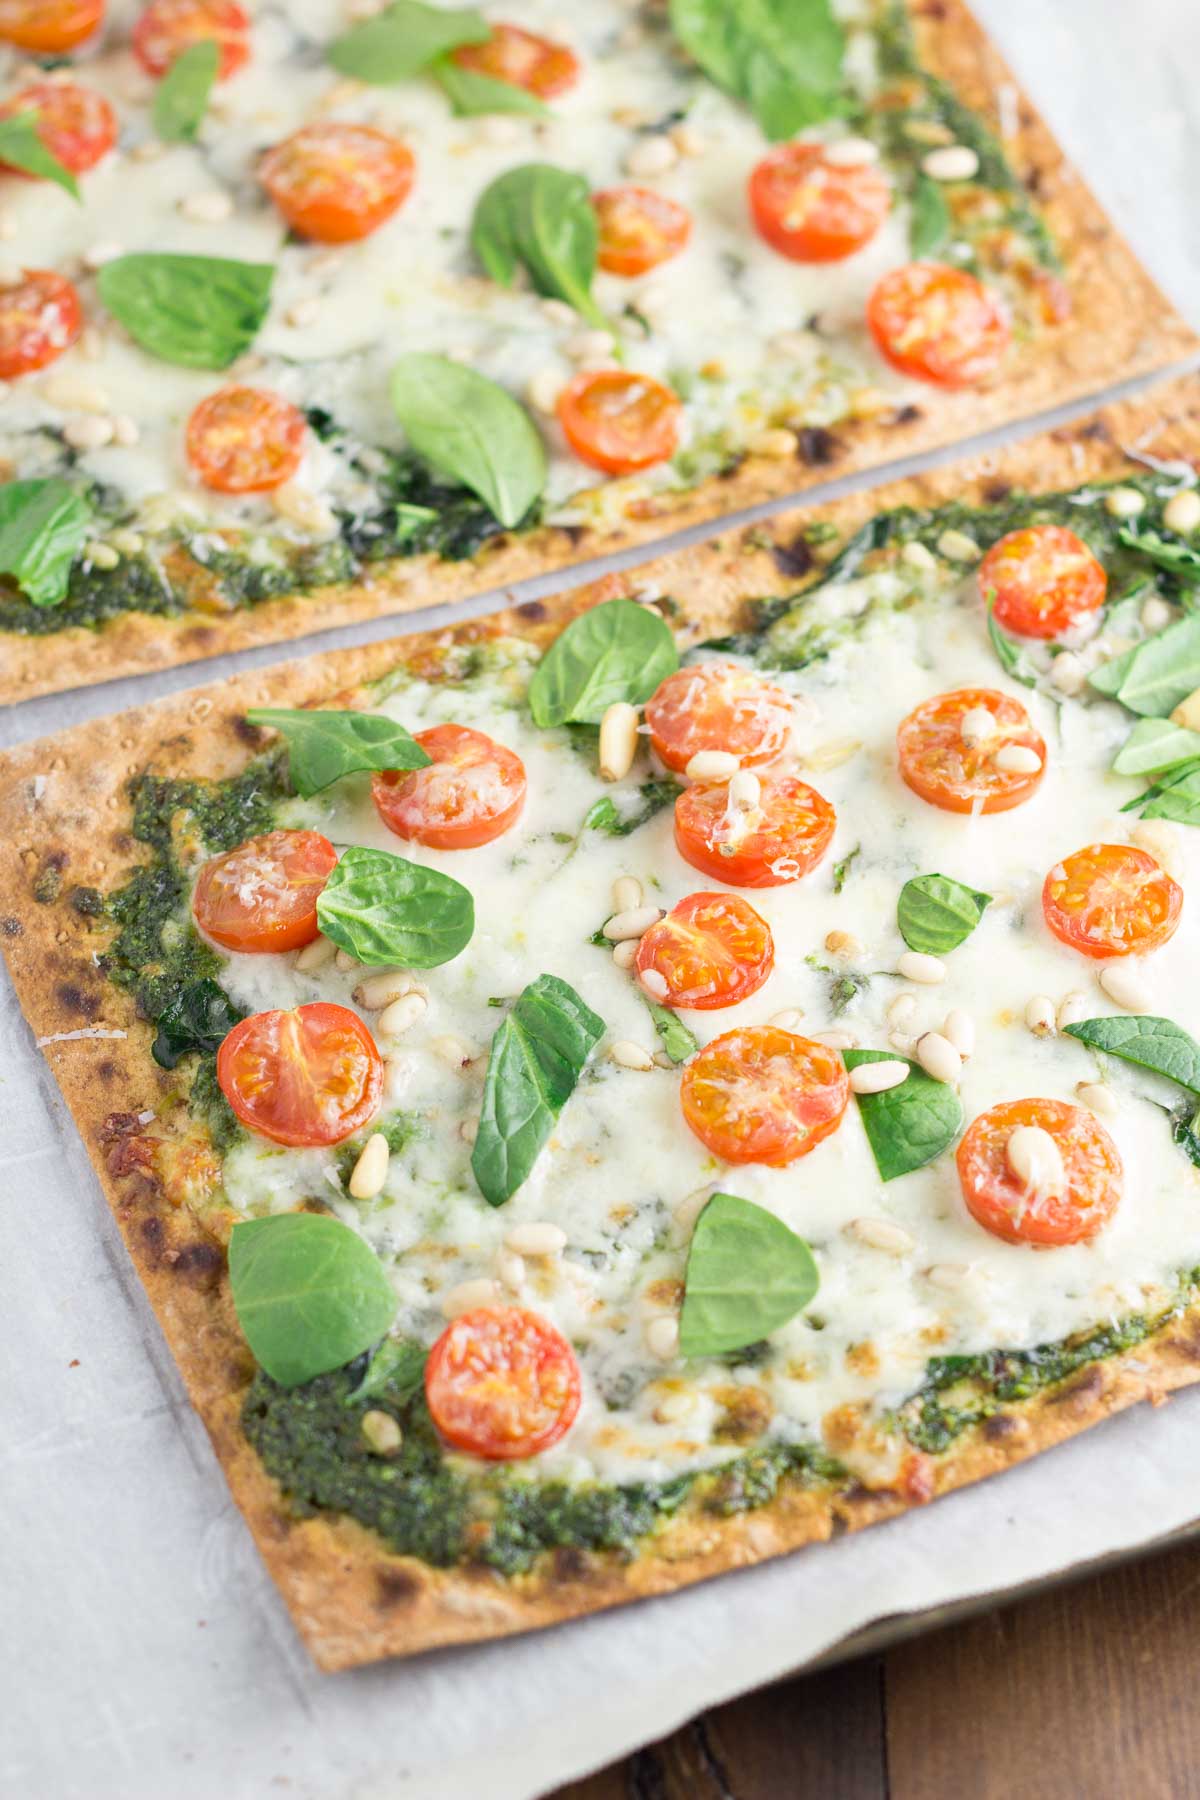 Spinach Pesto and Tomato Flatbread Pizzas - an easy dinner that you can have on your table in 30 minutes! These vegetarian pizzas are so good with a crispy whole wheat flatbread crust and crunchy pine nuts!